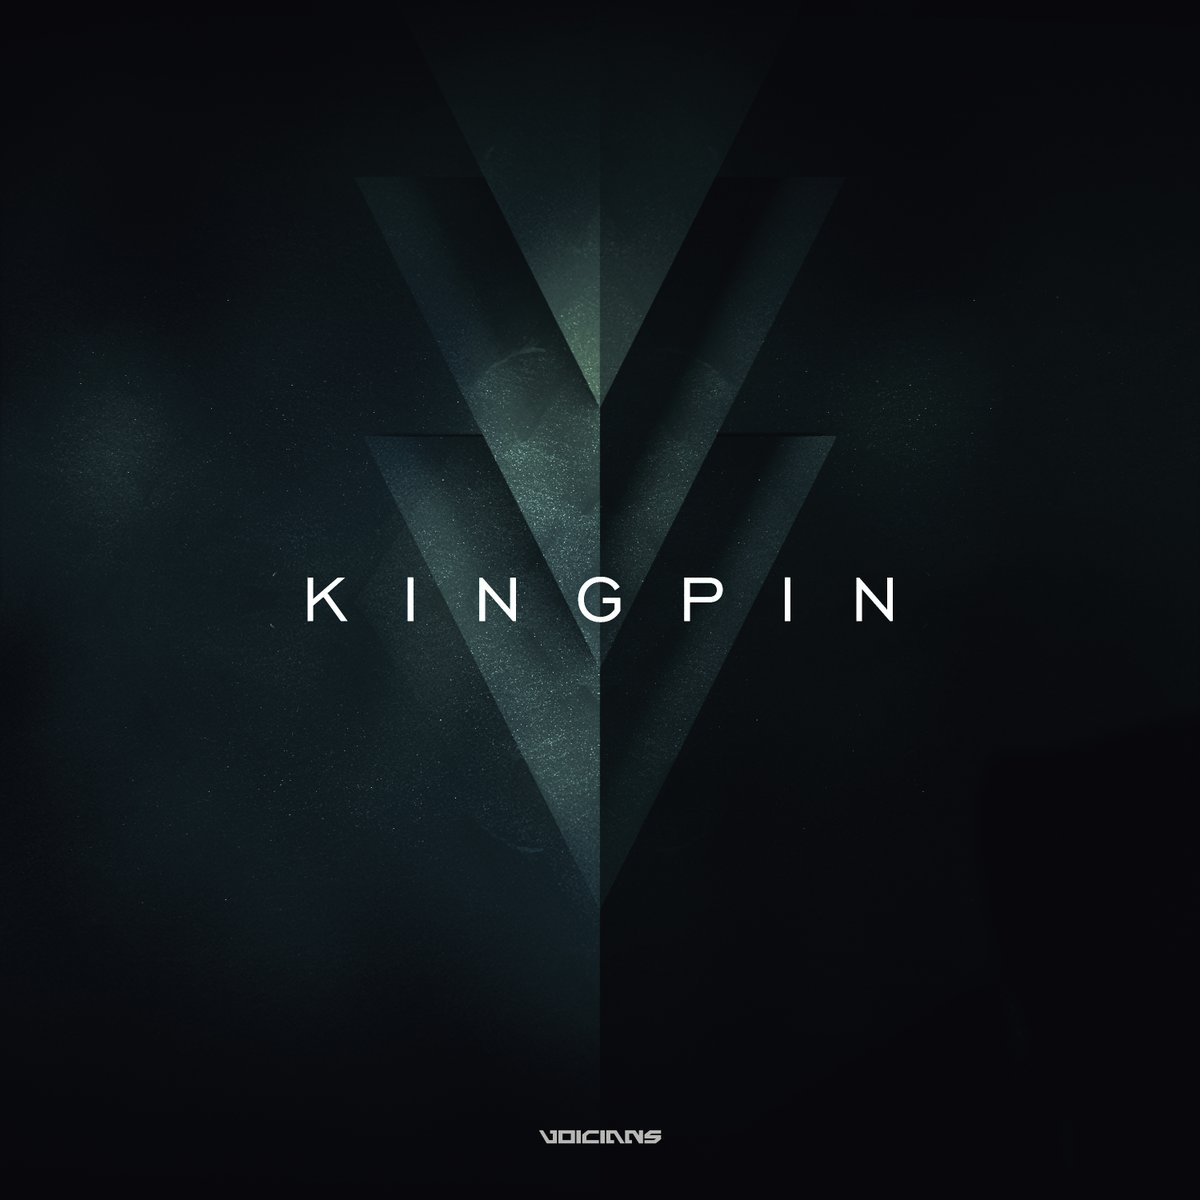 My last release of the year! The KINGPIN EP is out now. 5 Dancefloor Drum & Bass tracks that have been really smashing it in my sets this year. Enjoy! ditto.fm/kingpin-voicia…